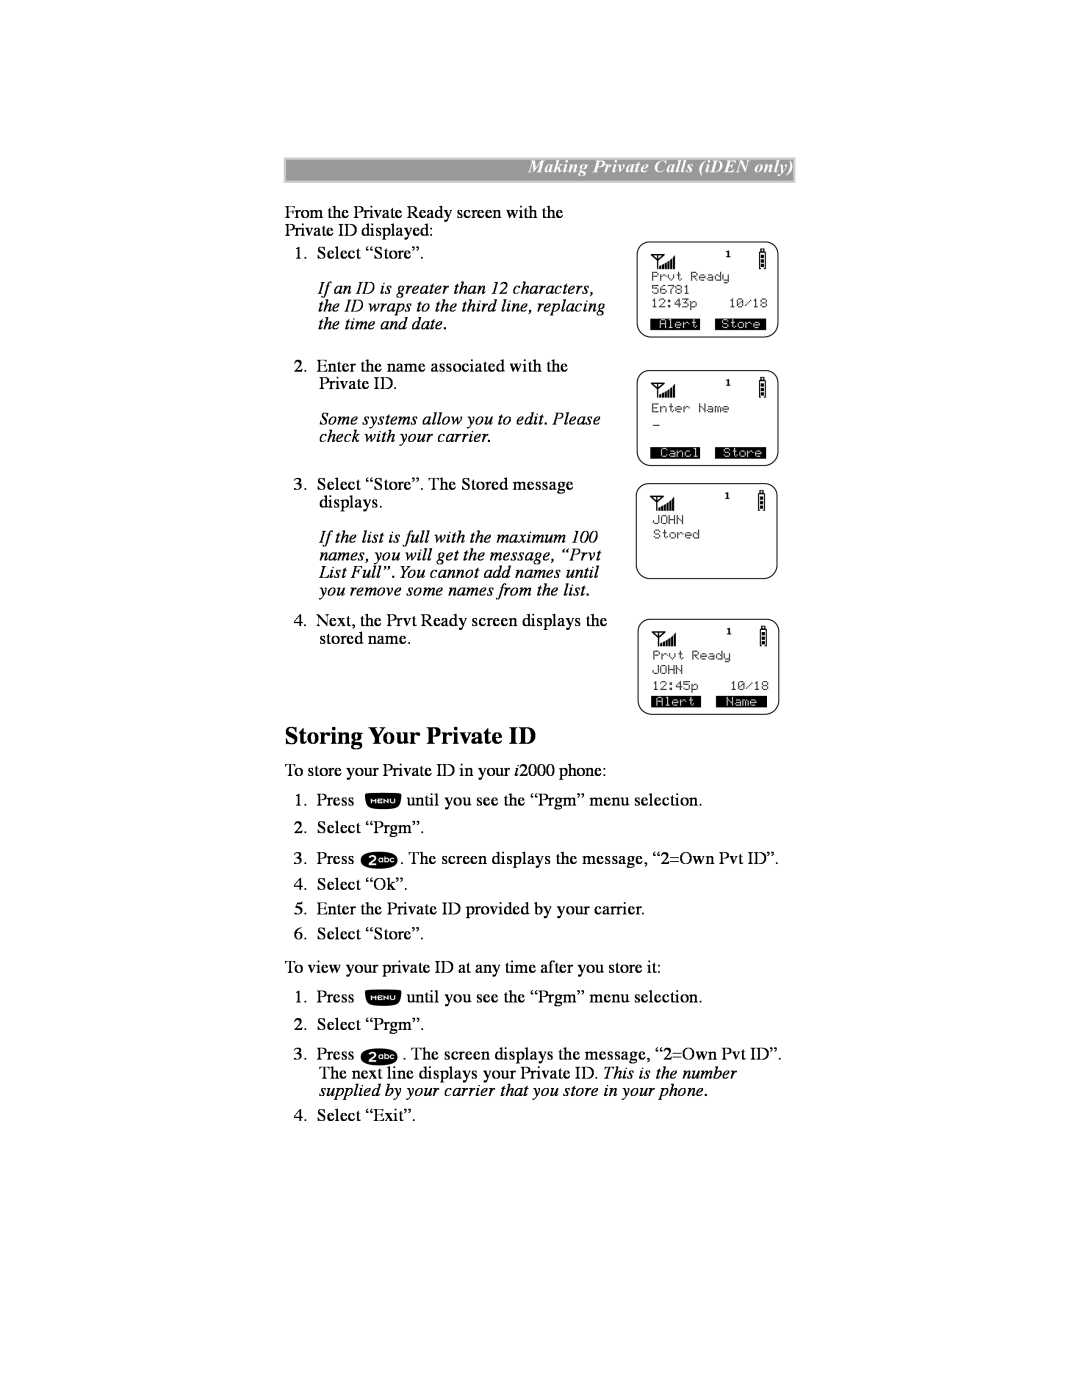 Motorola iDEN manual Storing Your Private ID, Some systems allow you to edit. Please check with your carrier 